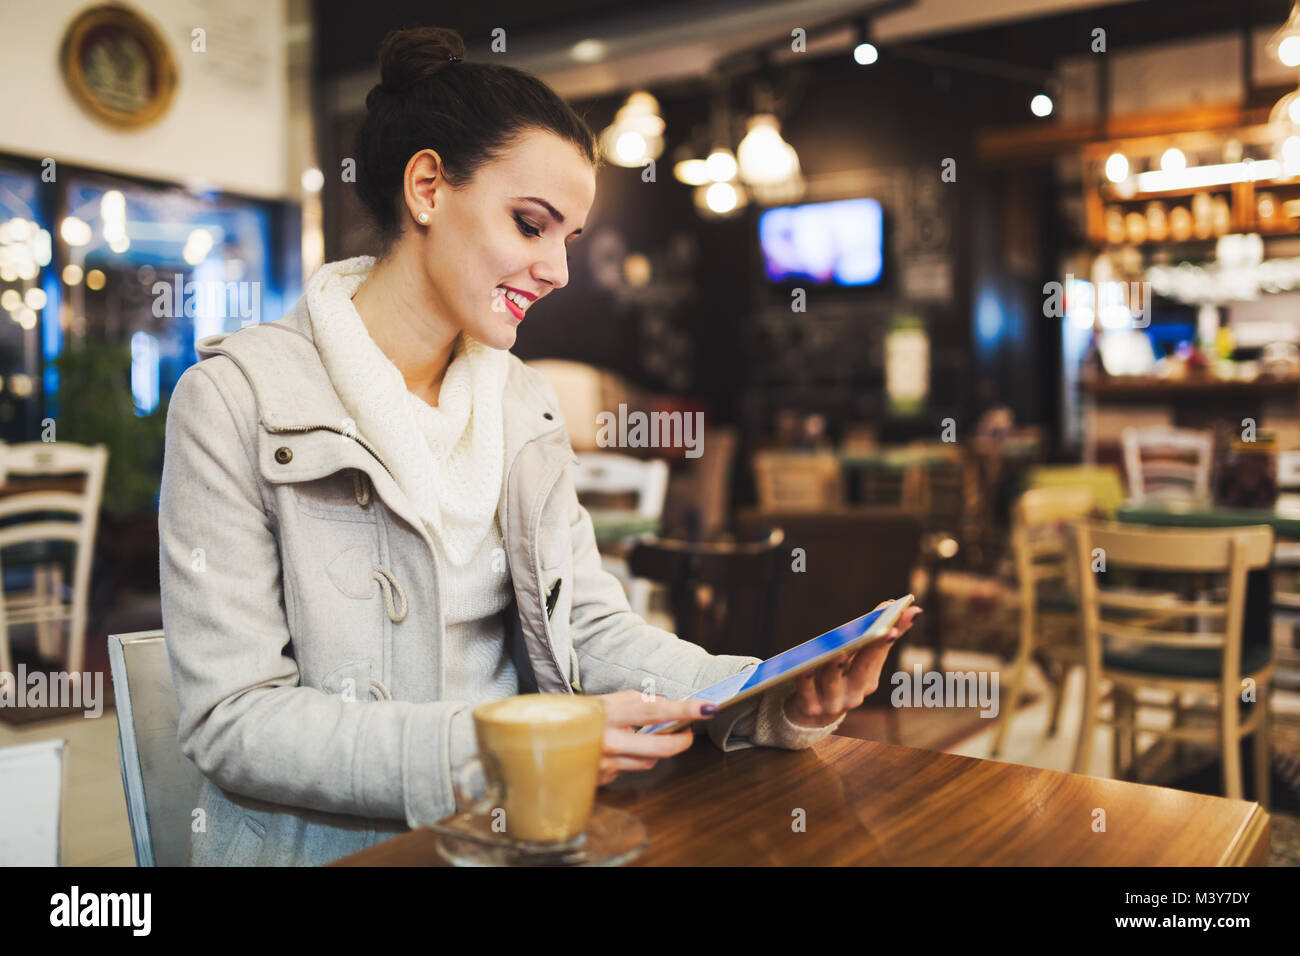 Attractive young woman using tablet in cafe Banque D'Images